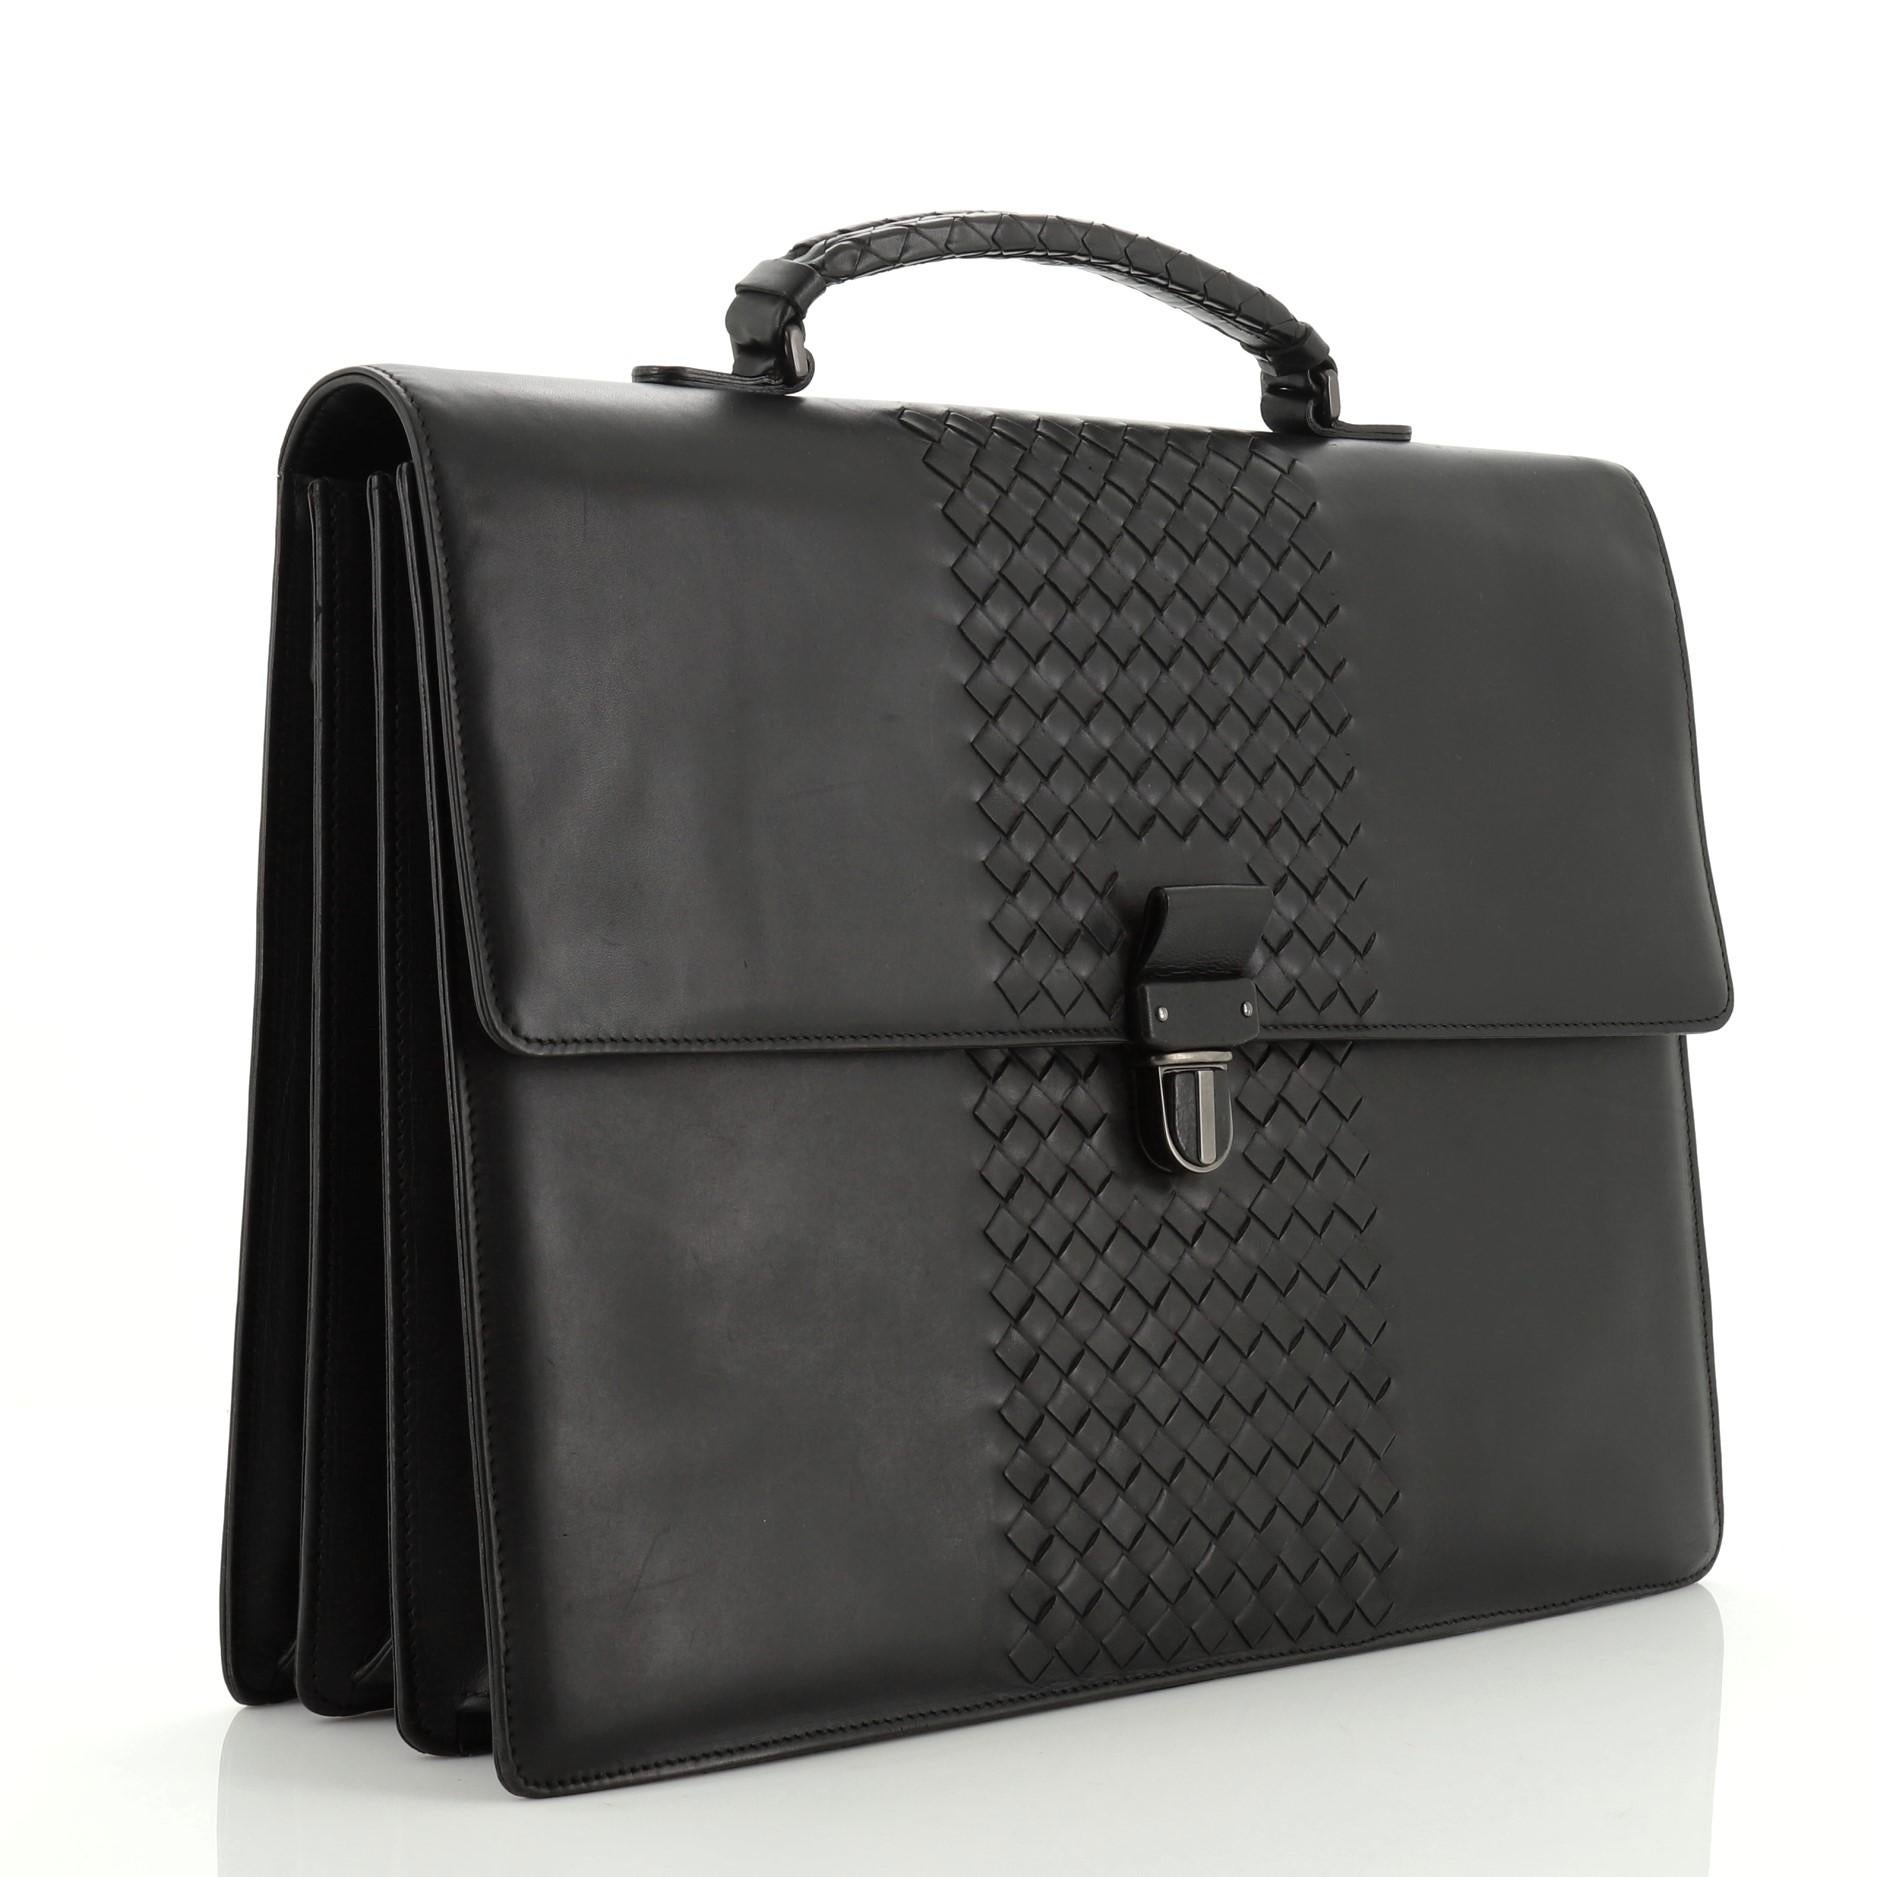 This Bottega Veneta Envelope Briefcase Leather with Intrecciato Detail, crafted in black leather with intrecciato detail, features a single loop handle, back zip pocket, and matte gunmetal-tone hardware. Its slide-lock closure opens to a black